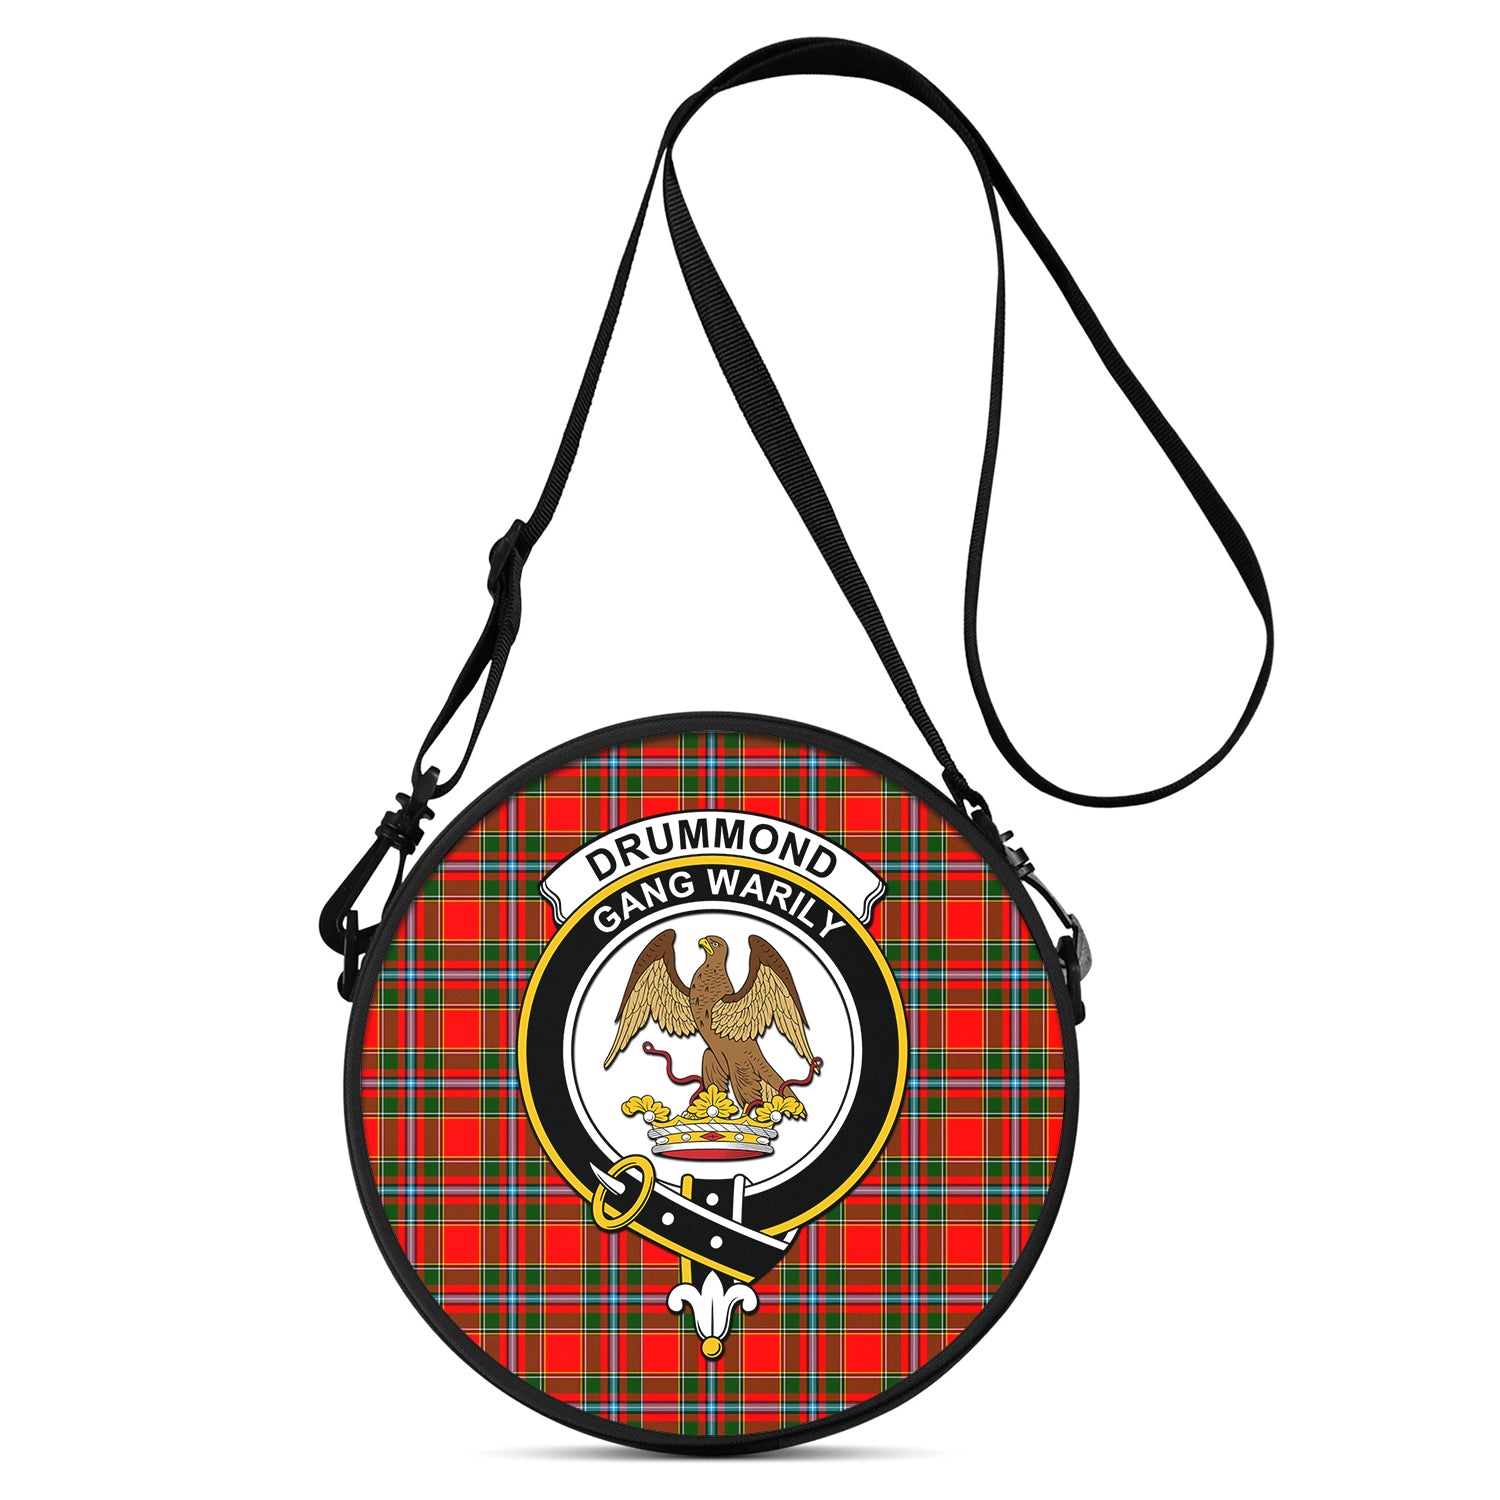 drummond-of-perth-tartan-round-satchel-bags-with-family-crest